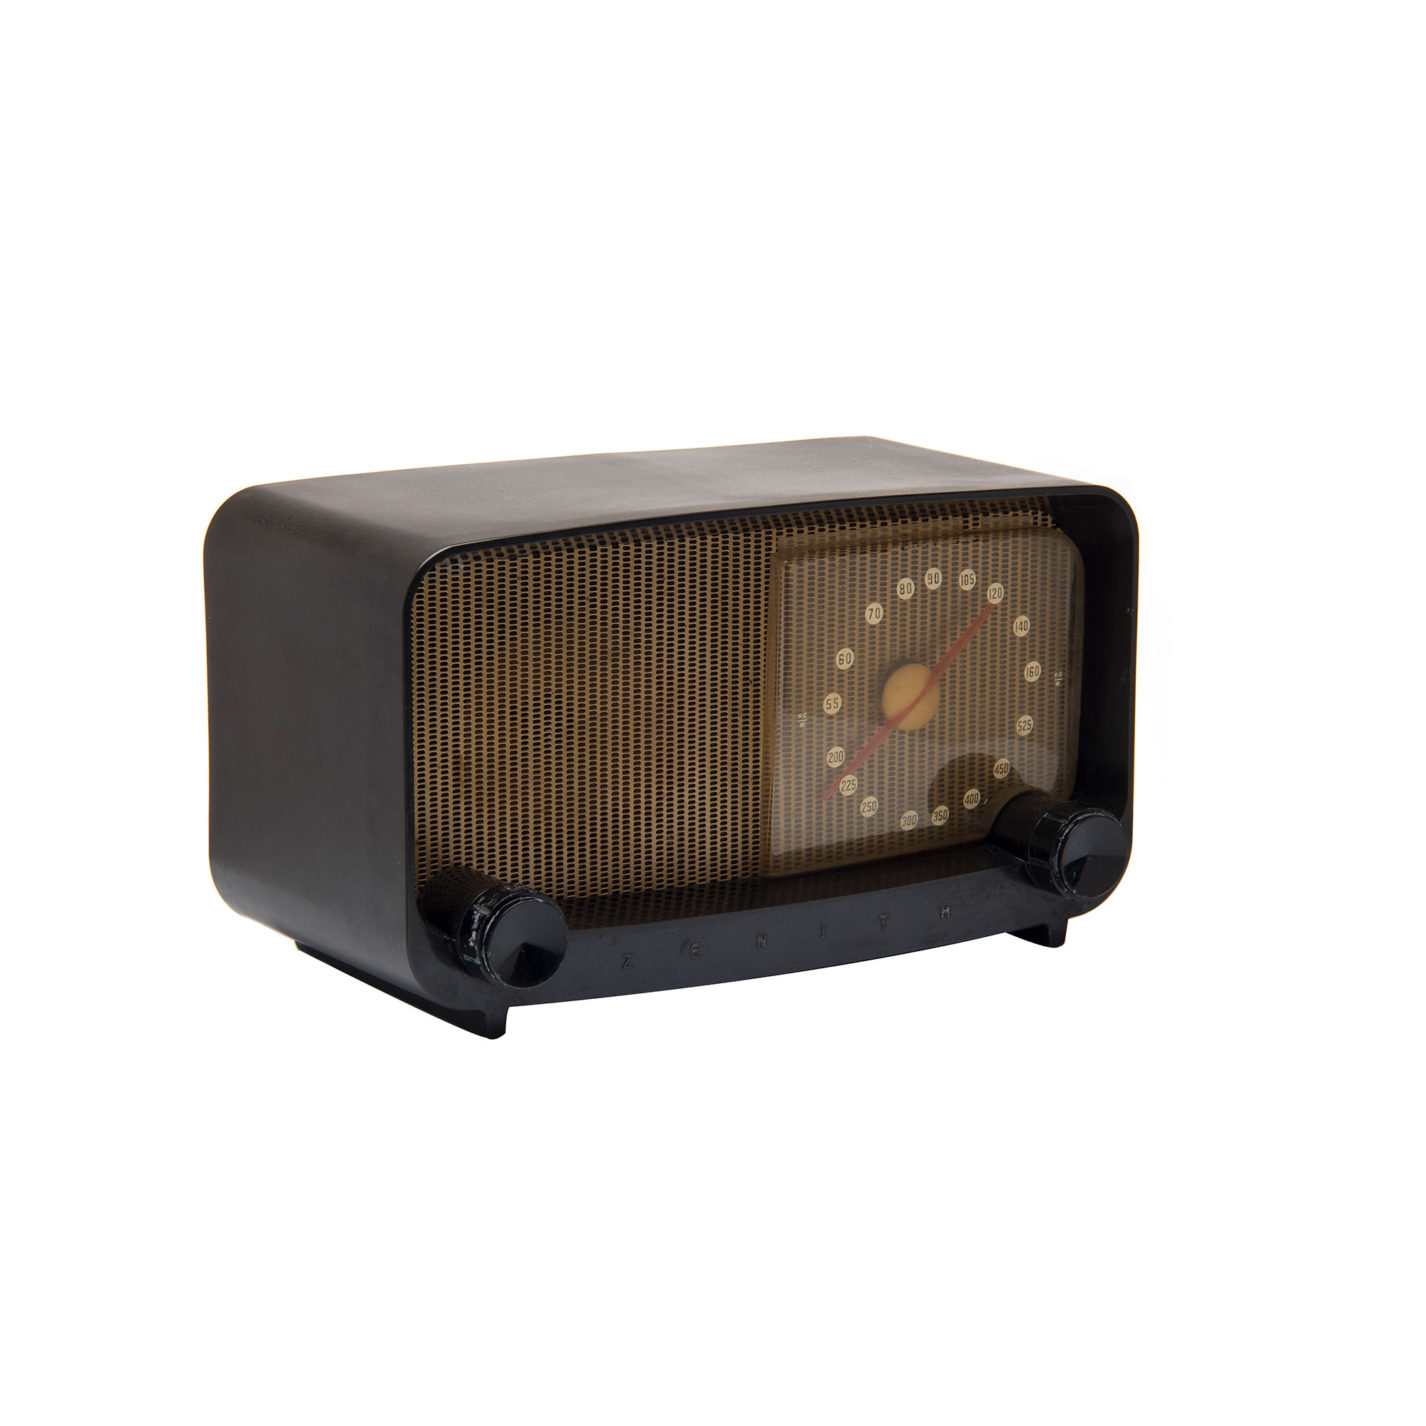 Rectangular table radio with dark brown plastic housing The housing has rounded corners and opens at the front to a gold-colored speaker and clear plastic radio dial with white number markers and a red needle.